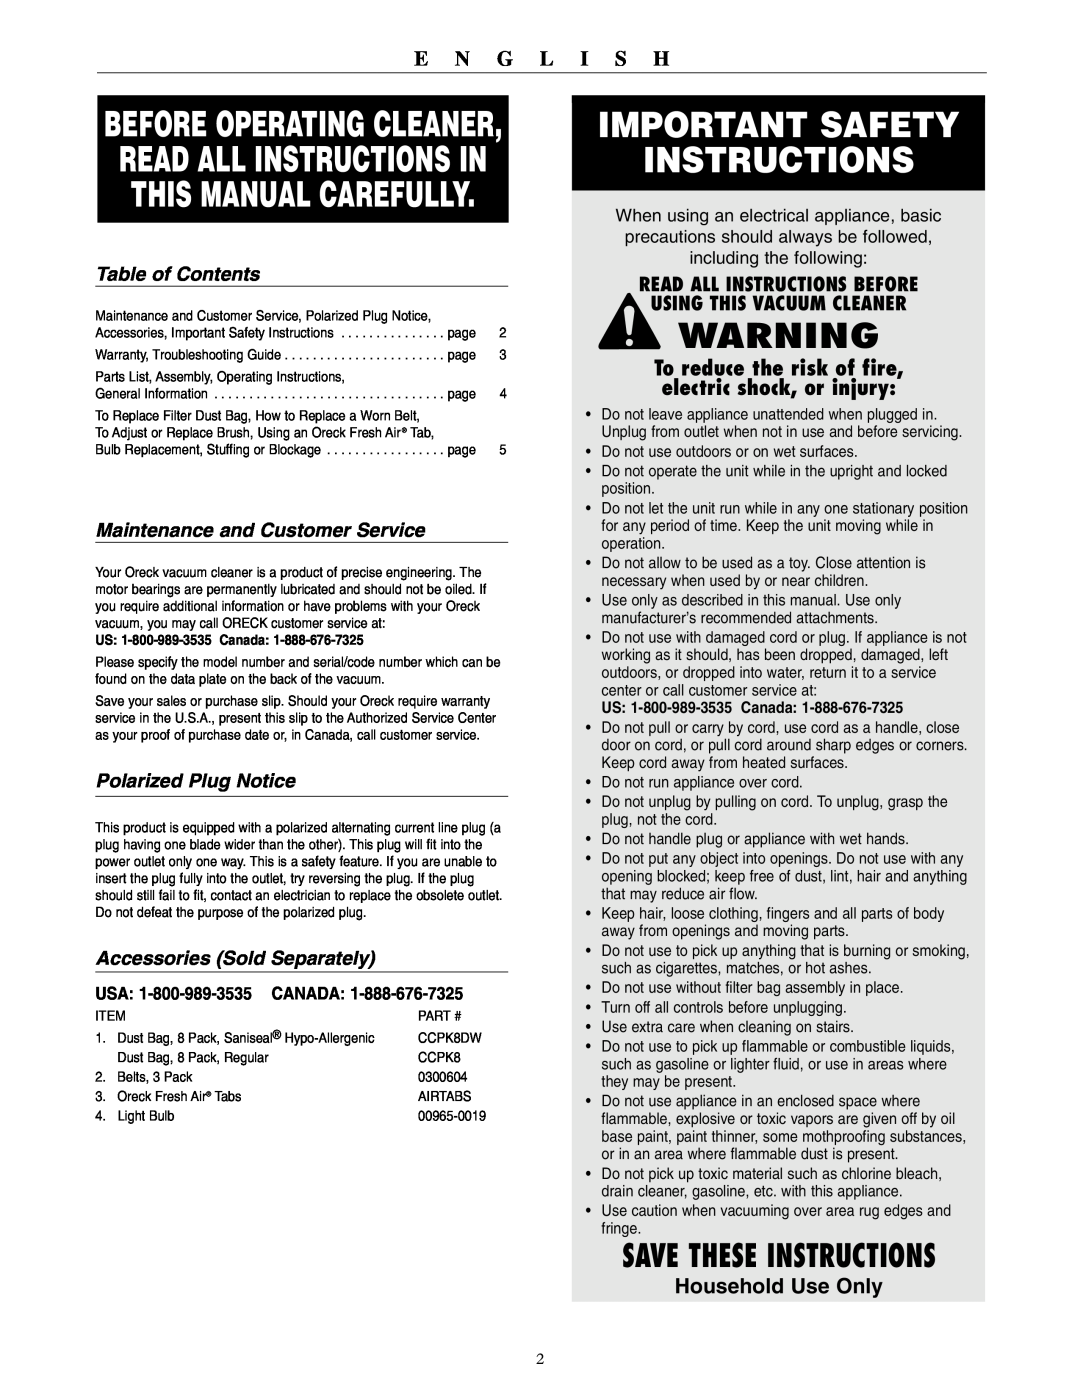 Oreck U3700HH Important Safety Instructions, Save These Instructions, Household Use Only, Table of Contents, E N G L I S H 